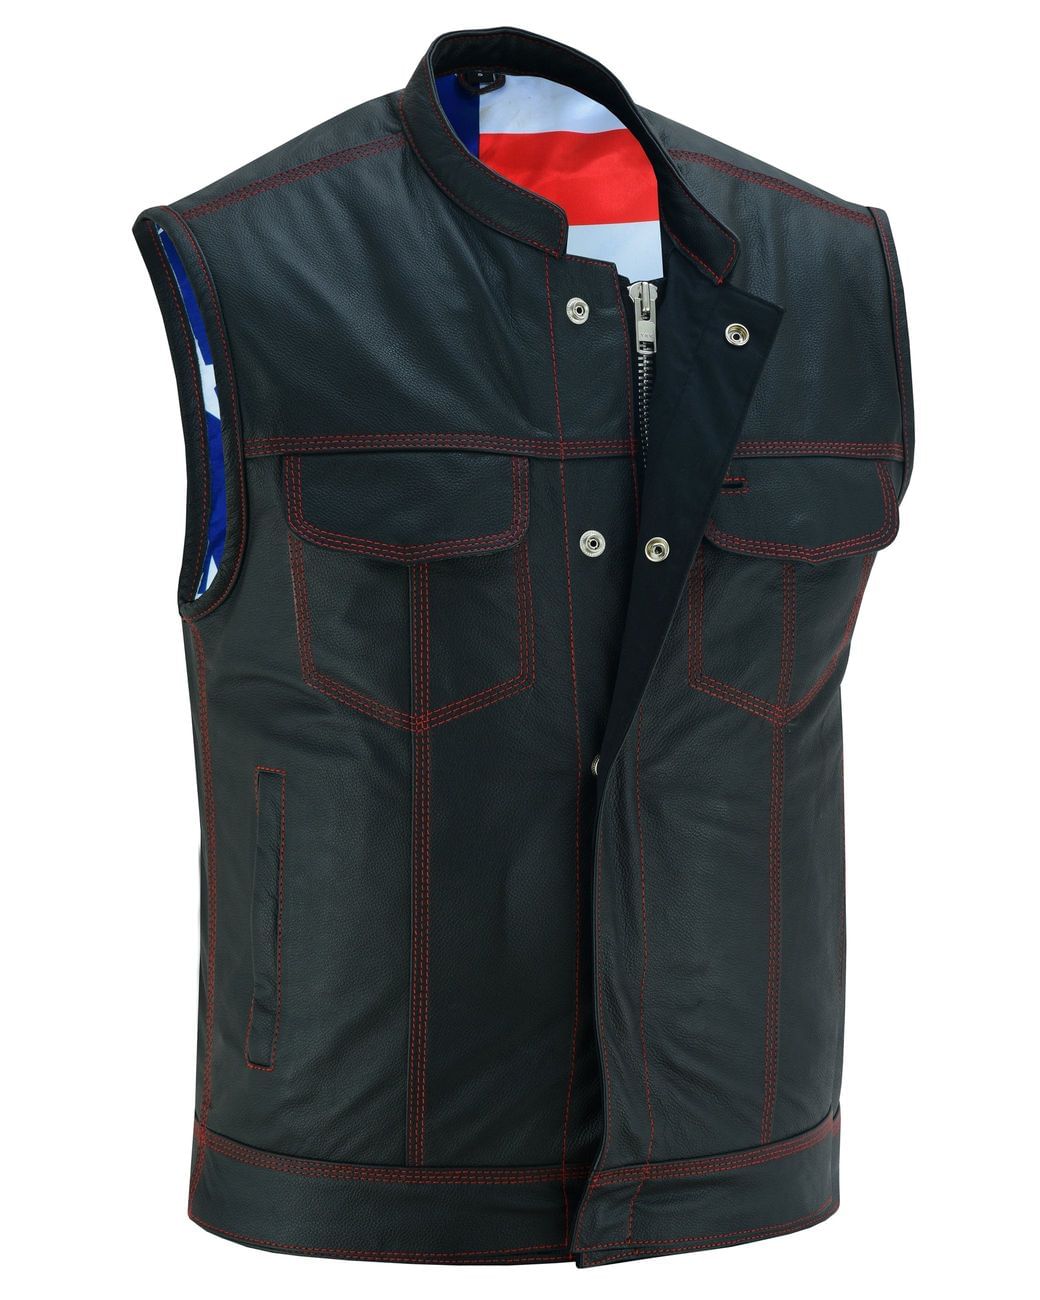 DS165 MEN’S LEATHER VEST WITH RED STITCHING AND USA INSIDE FLAG LINING WITH SCOOP COLLAR